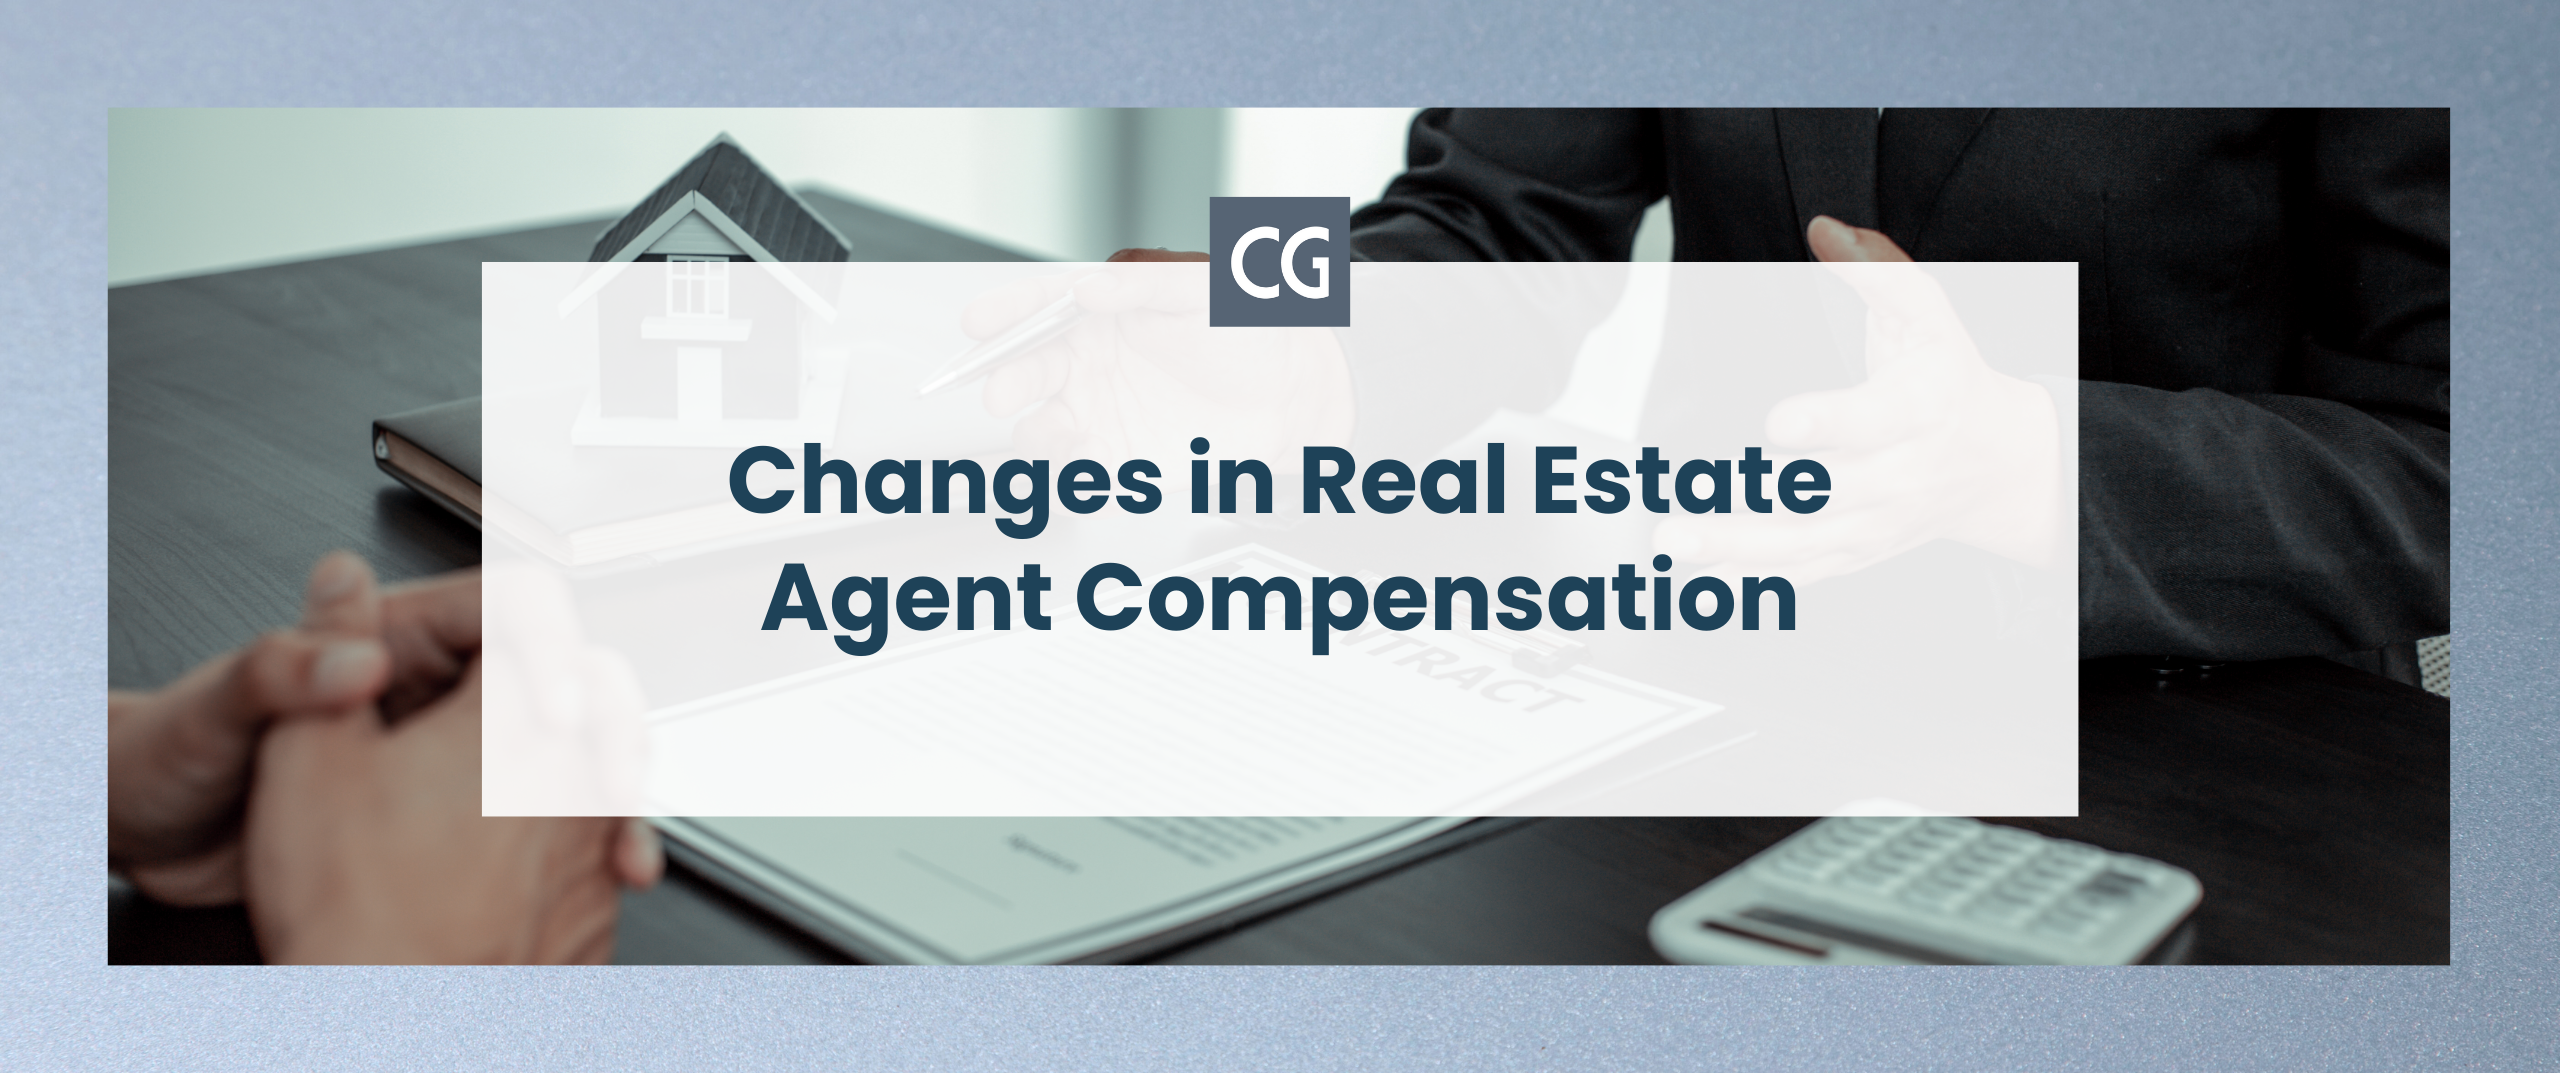 Changes in Real Estate Agent Compensation: Insights from CHARLESGATE Brokerage Sales Manager